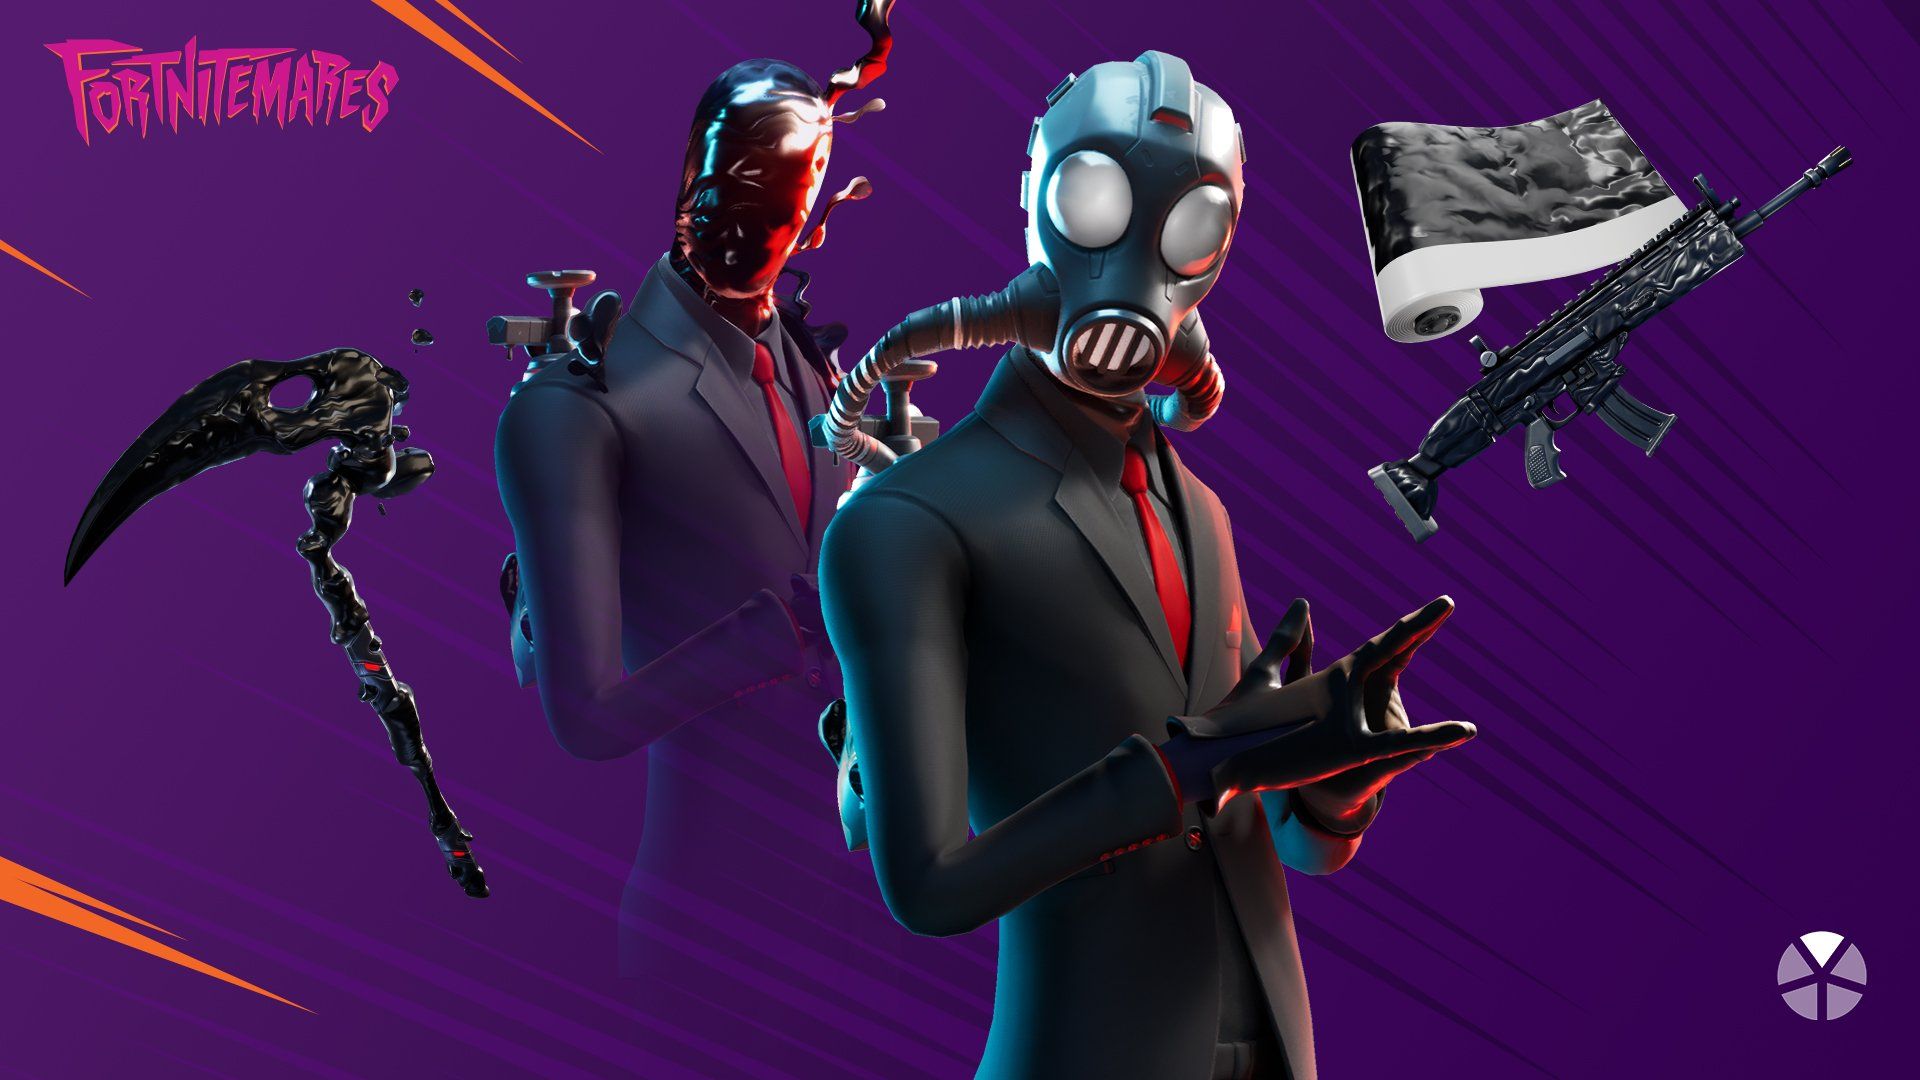 Fortnite the order from the shadows. Get the new Chaos Agent Outfit, Chaos Scythe, and Black Ooze Wrap in the Item Shop now! Face your fears: October 29